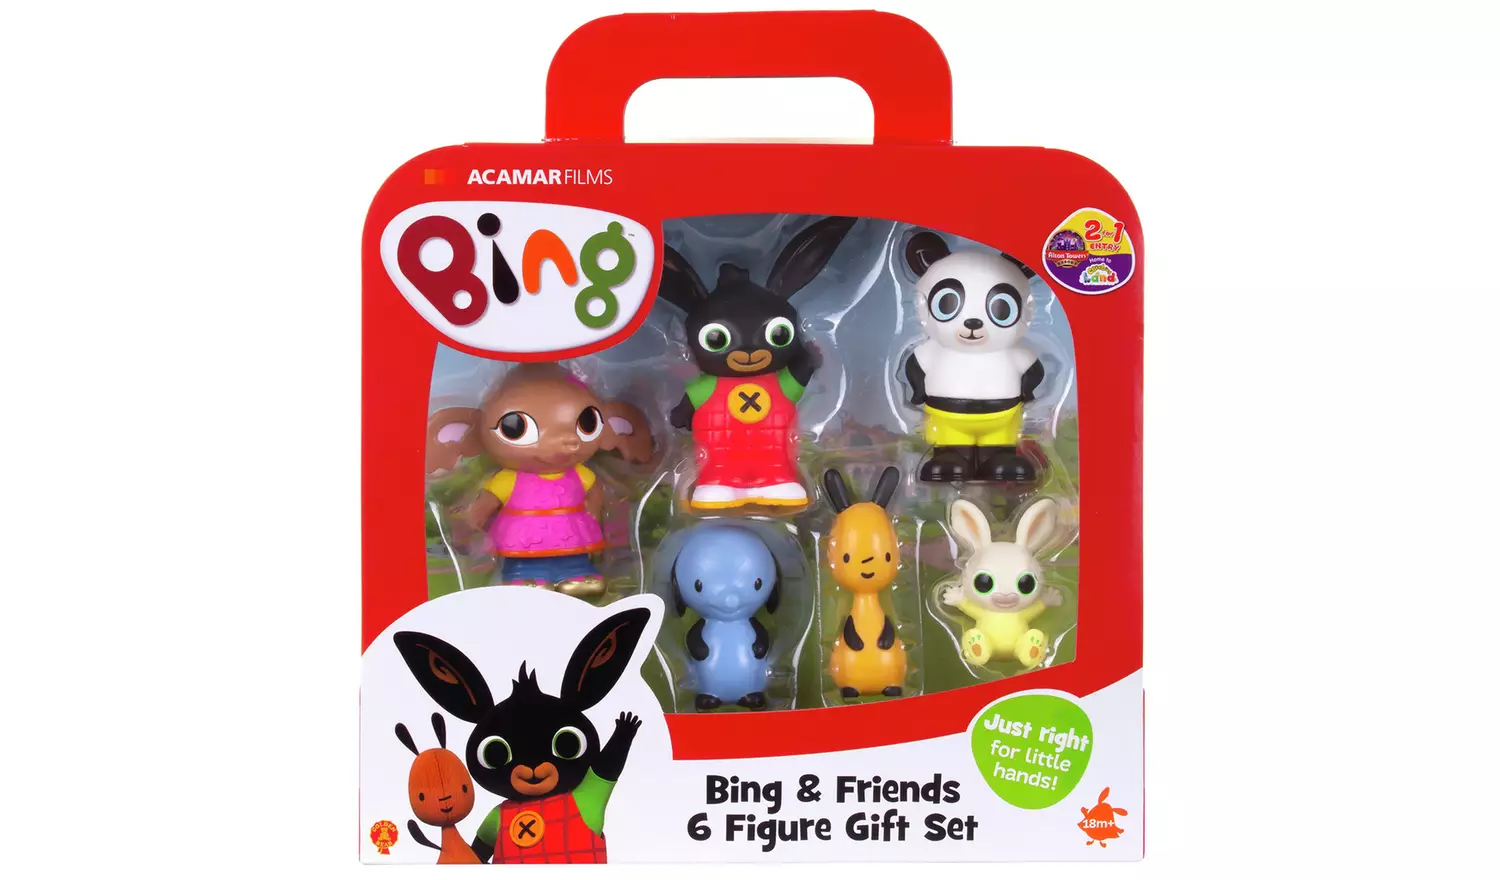 Bing and Friends 6 Figure Gift Set